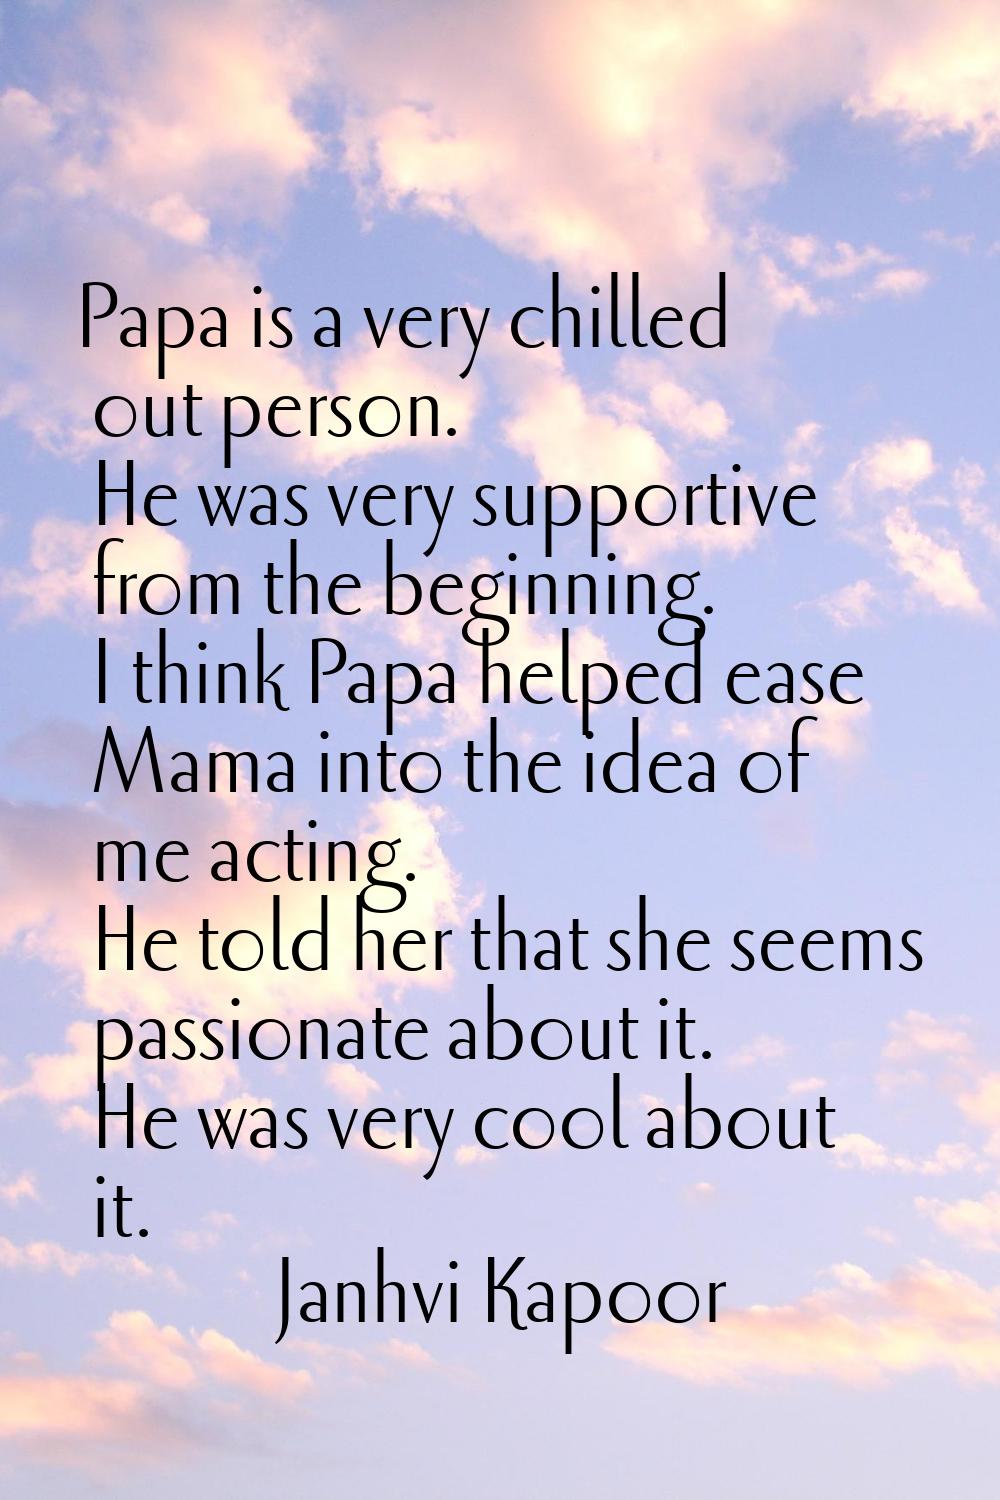 Papa is a very chilled out person. He was very supportive from the beginning. I think Papa helped e